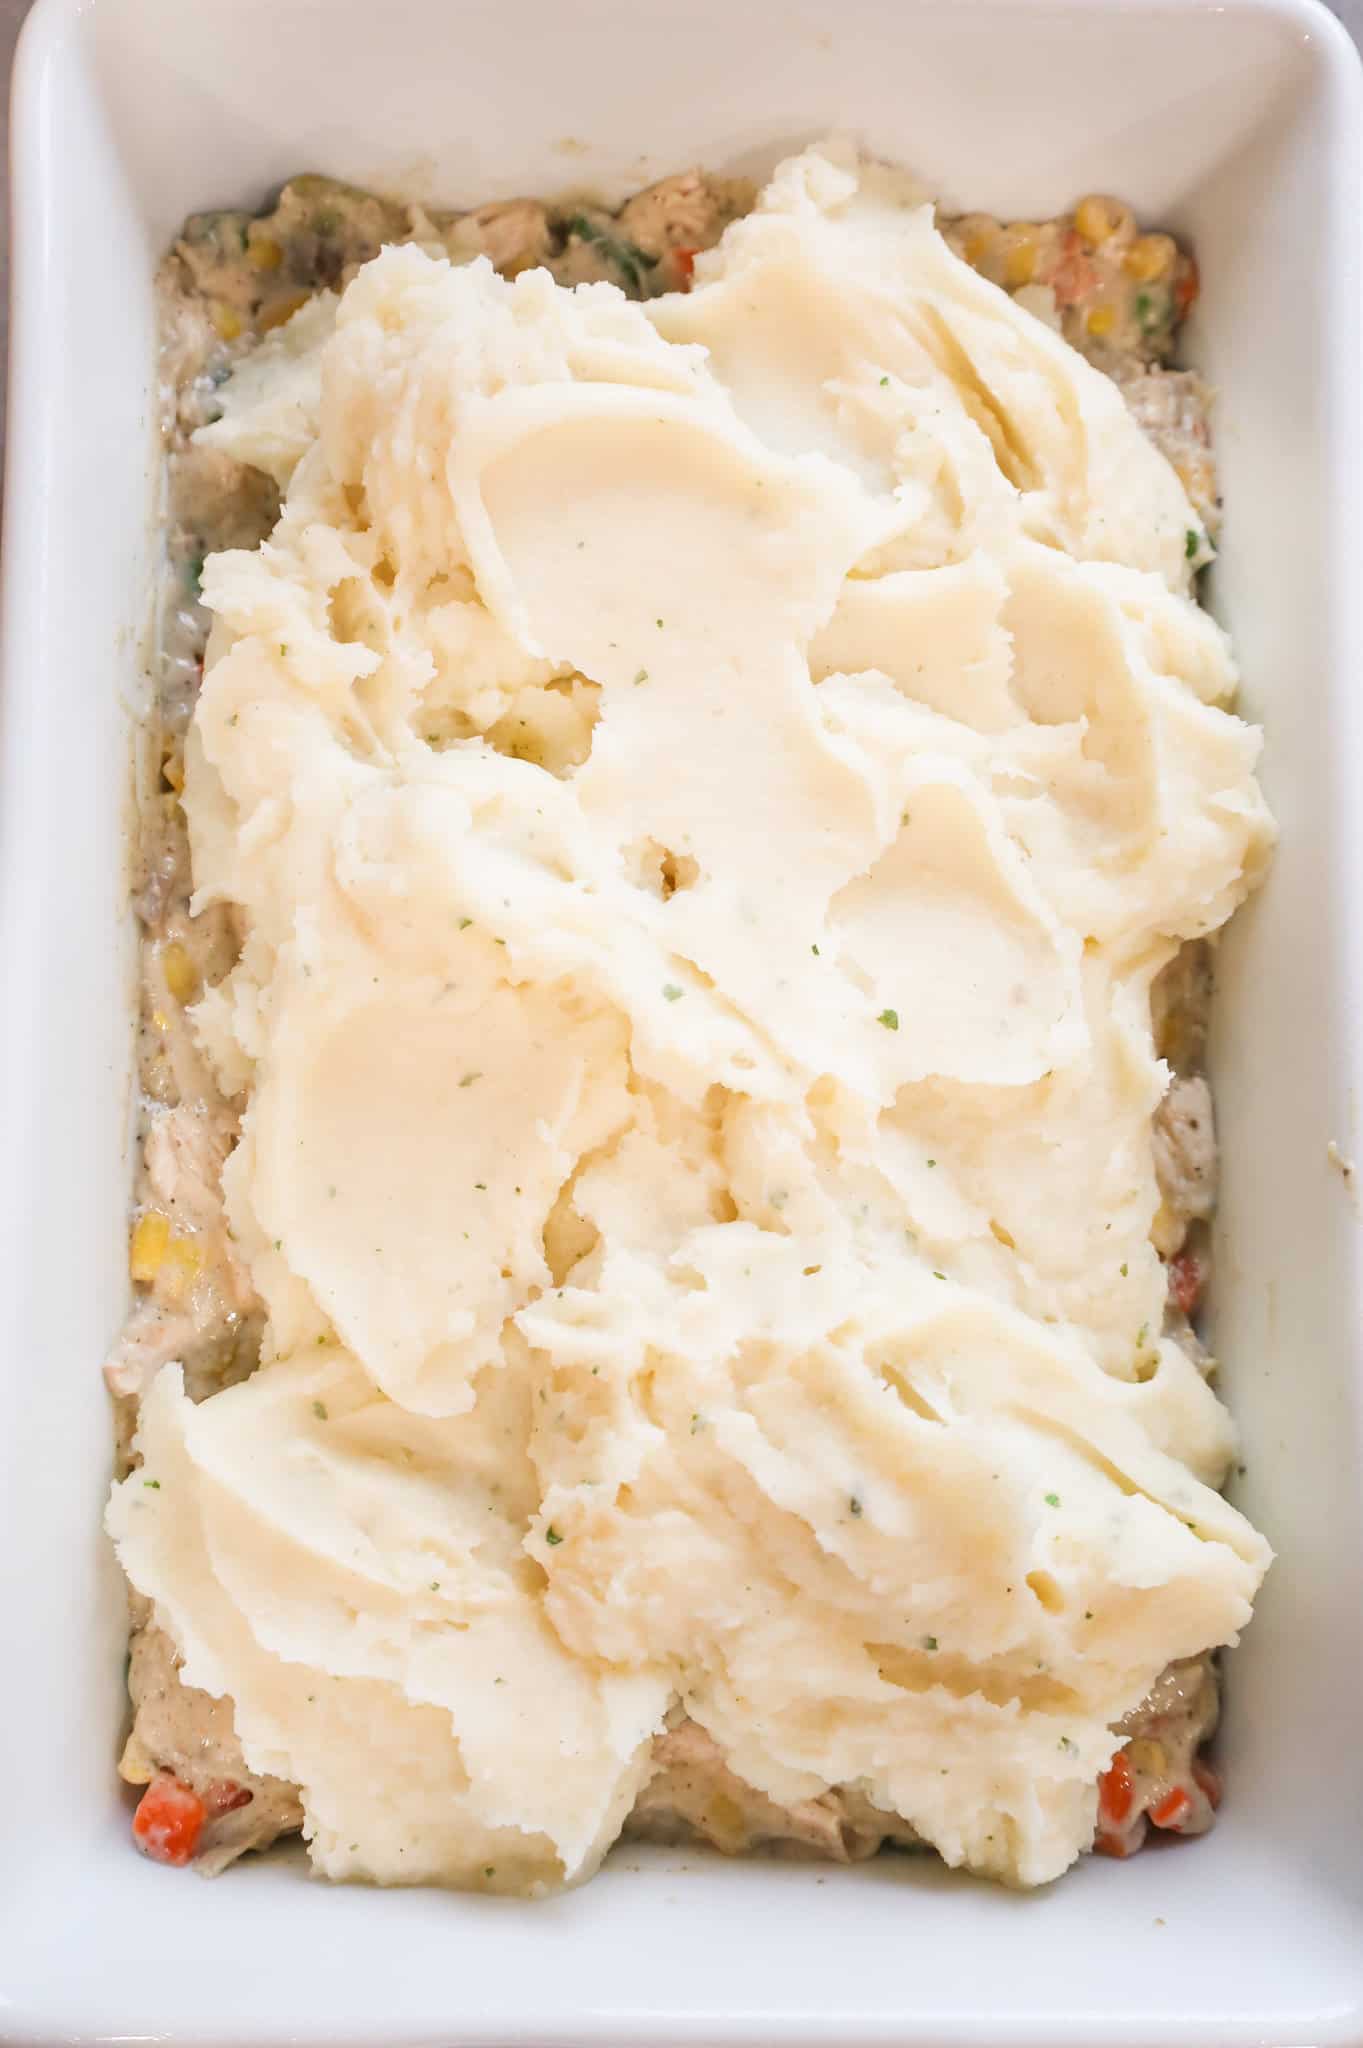 mashed potatoes scooped on top of chicken mixture in a baking dish